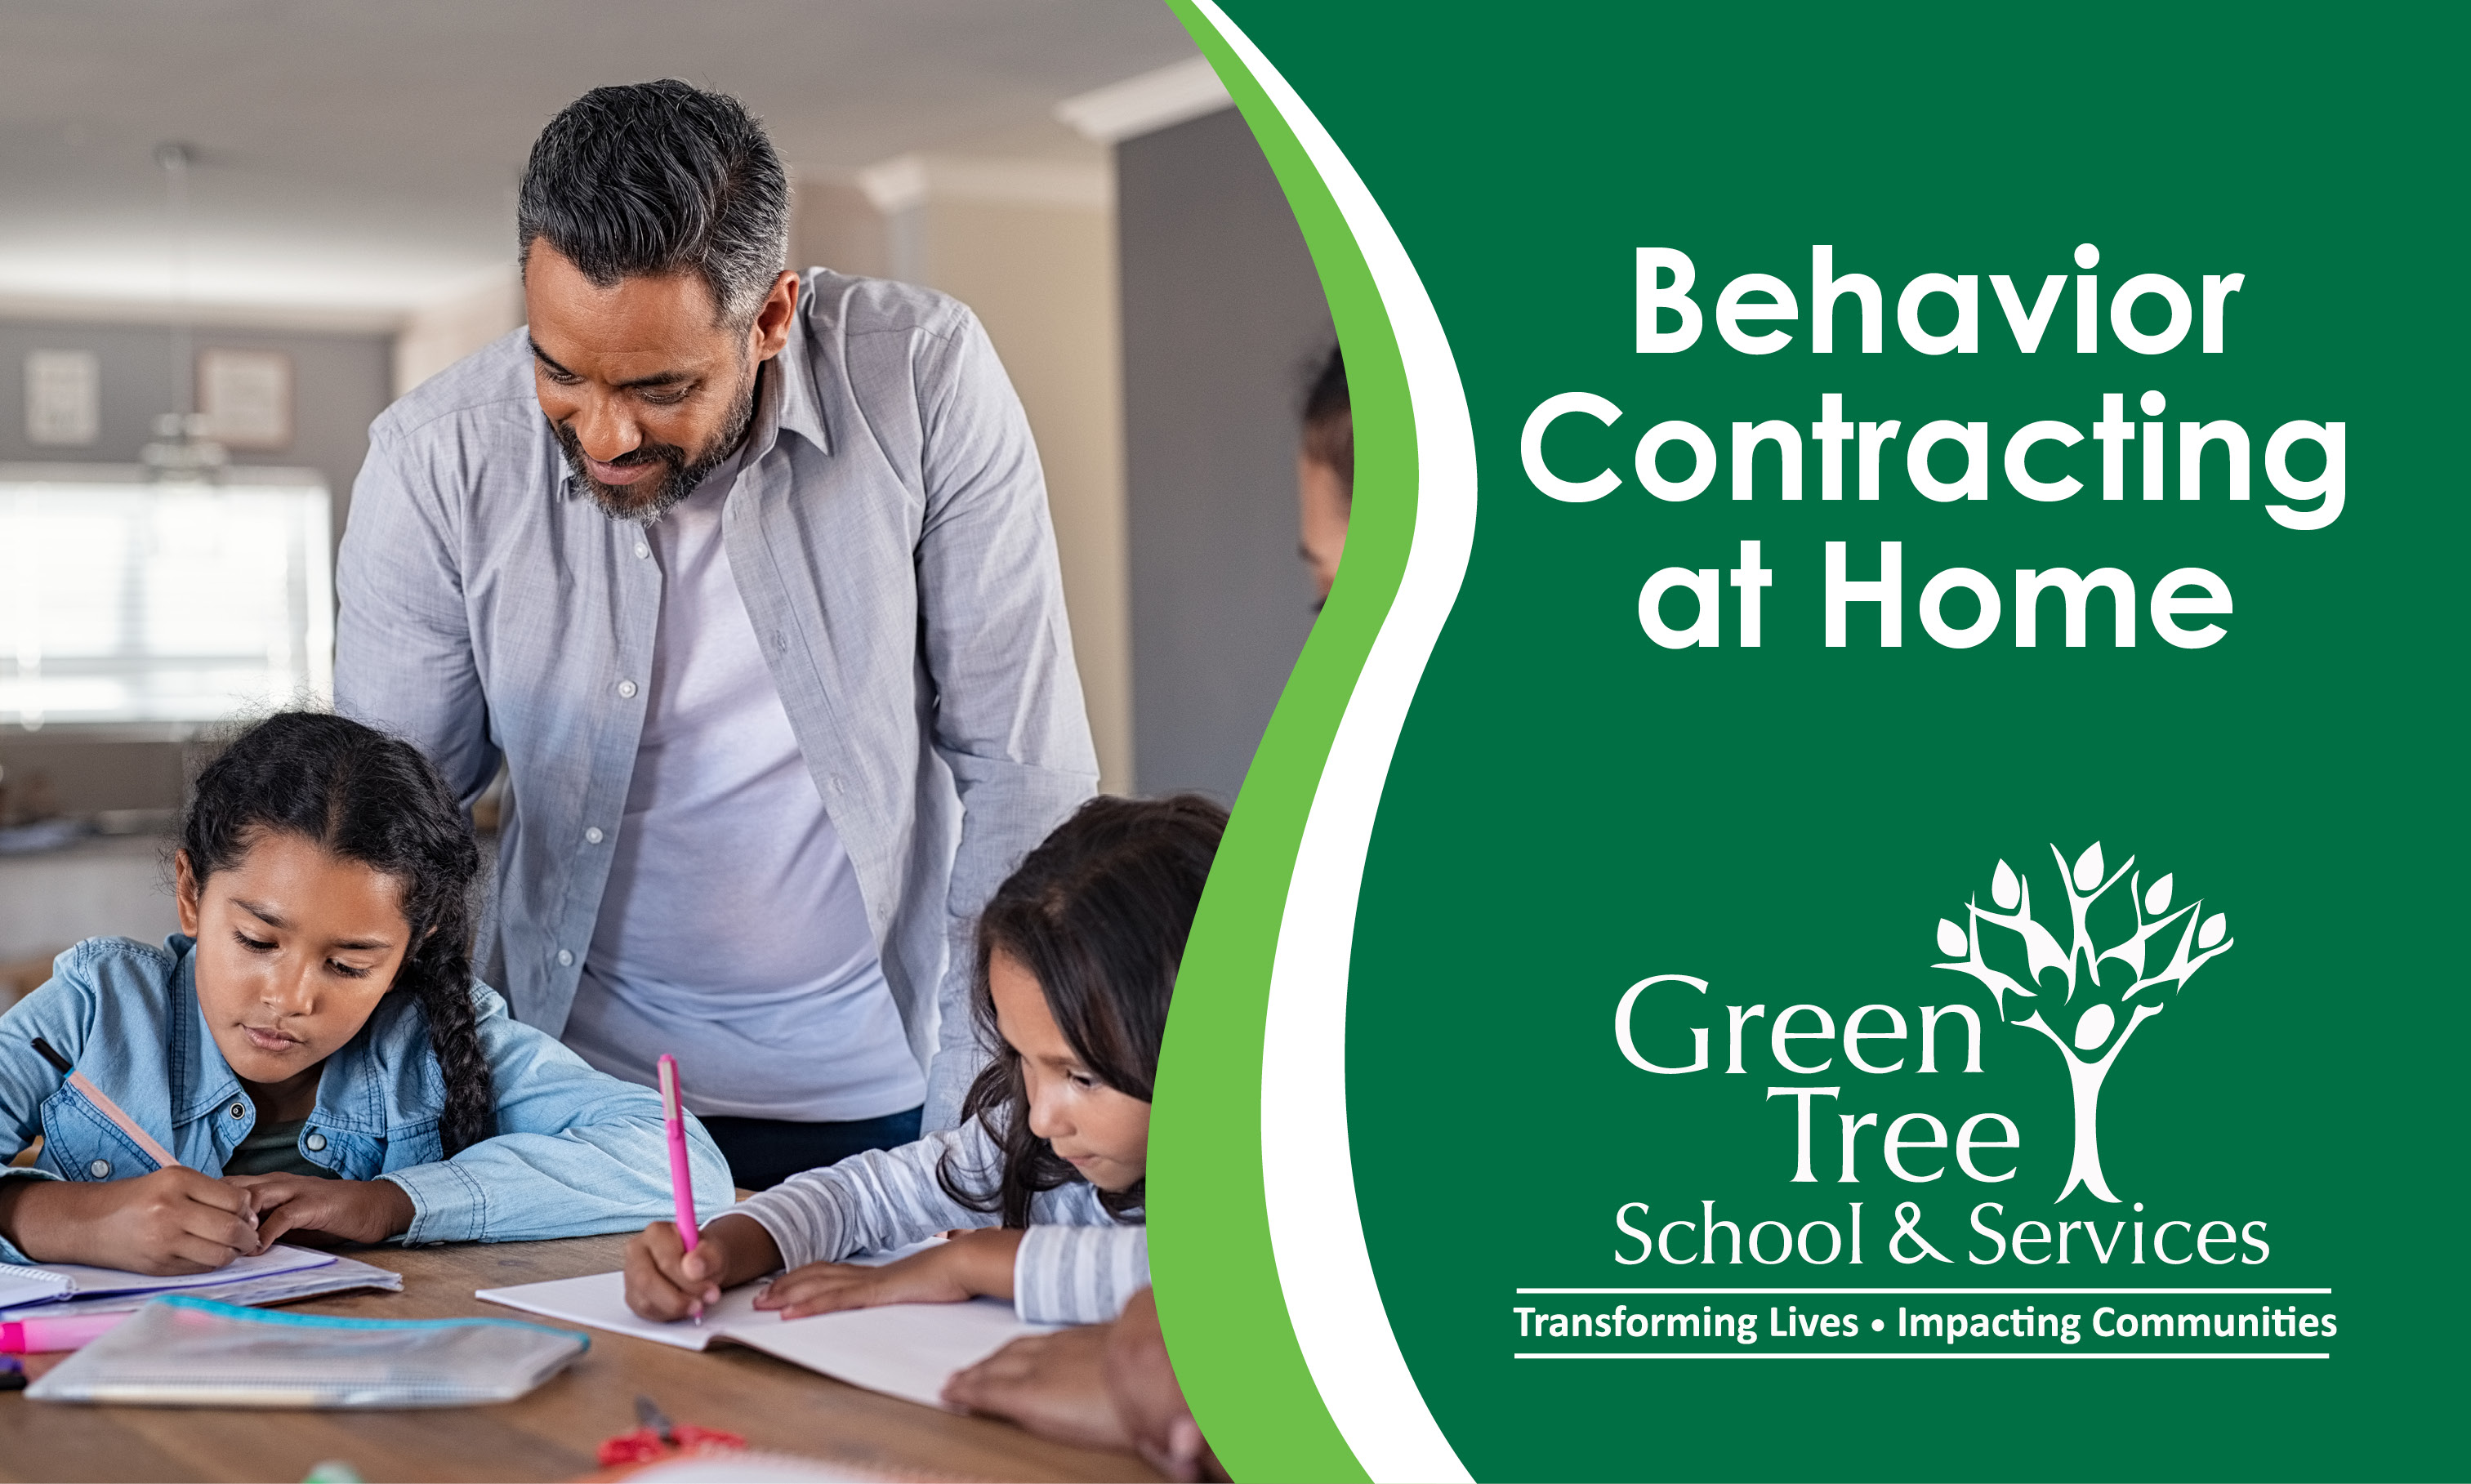 Behavior Contracting at Home